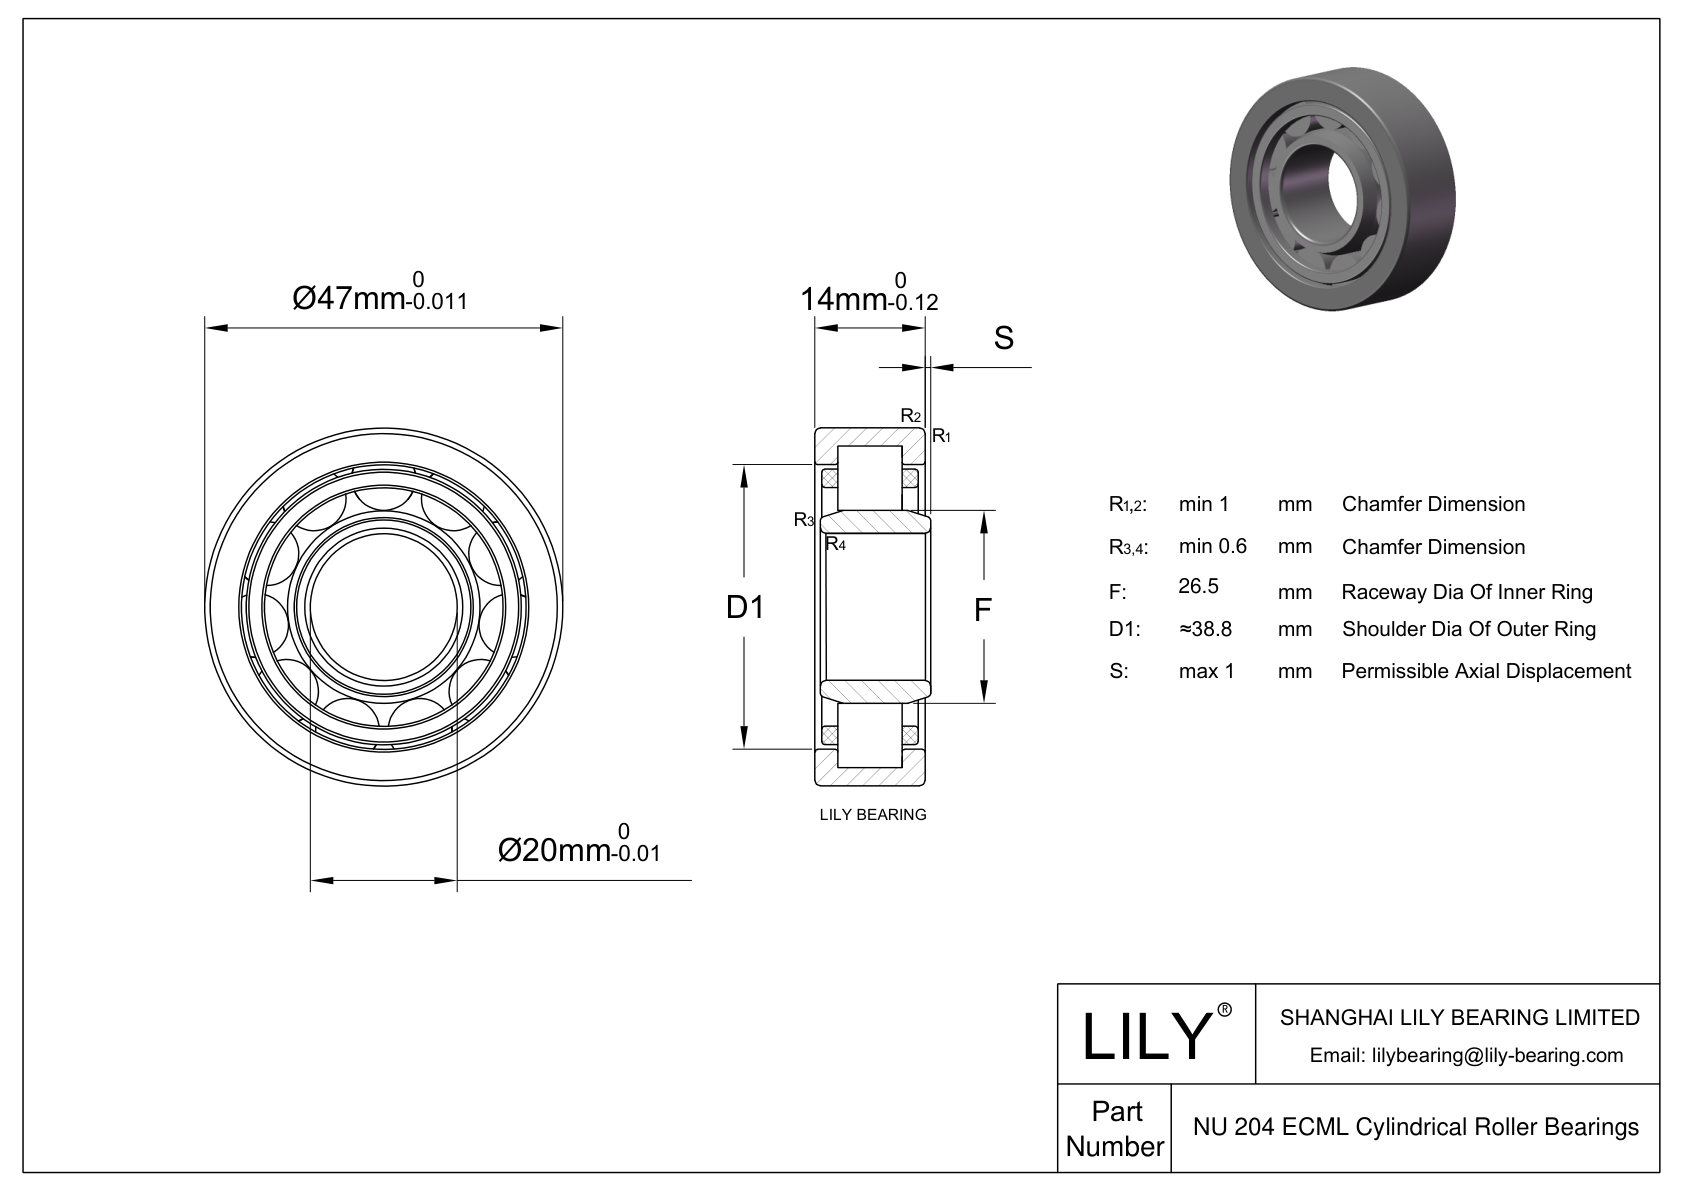 NU 204 ECML Single Row Cylindrical Roller Bearings With Inner Ring cad drawing